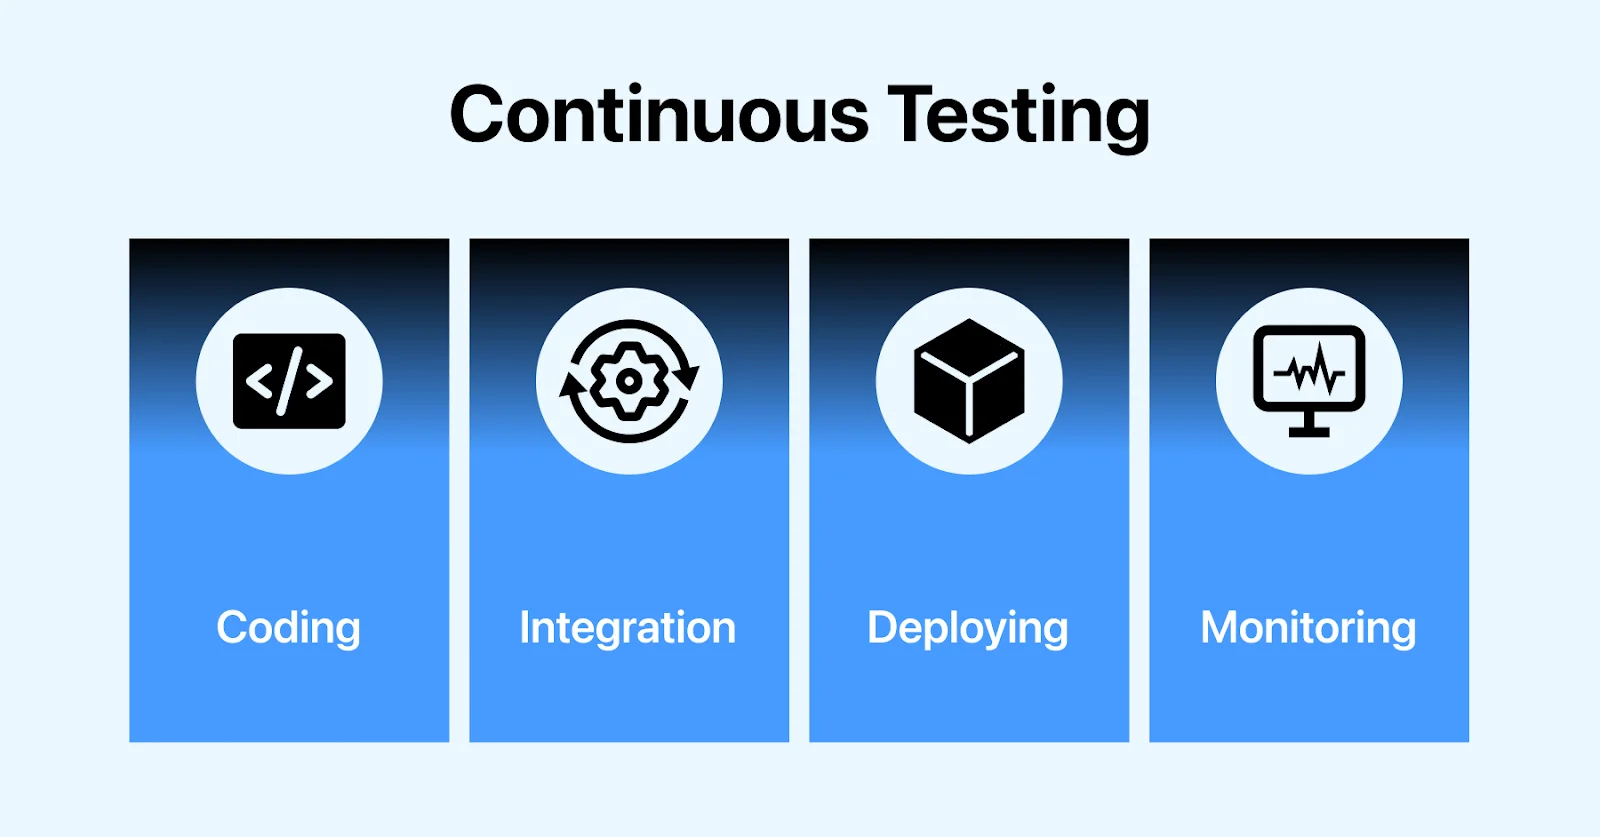 Continuous Testing Phases